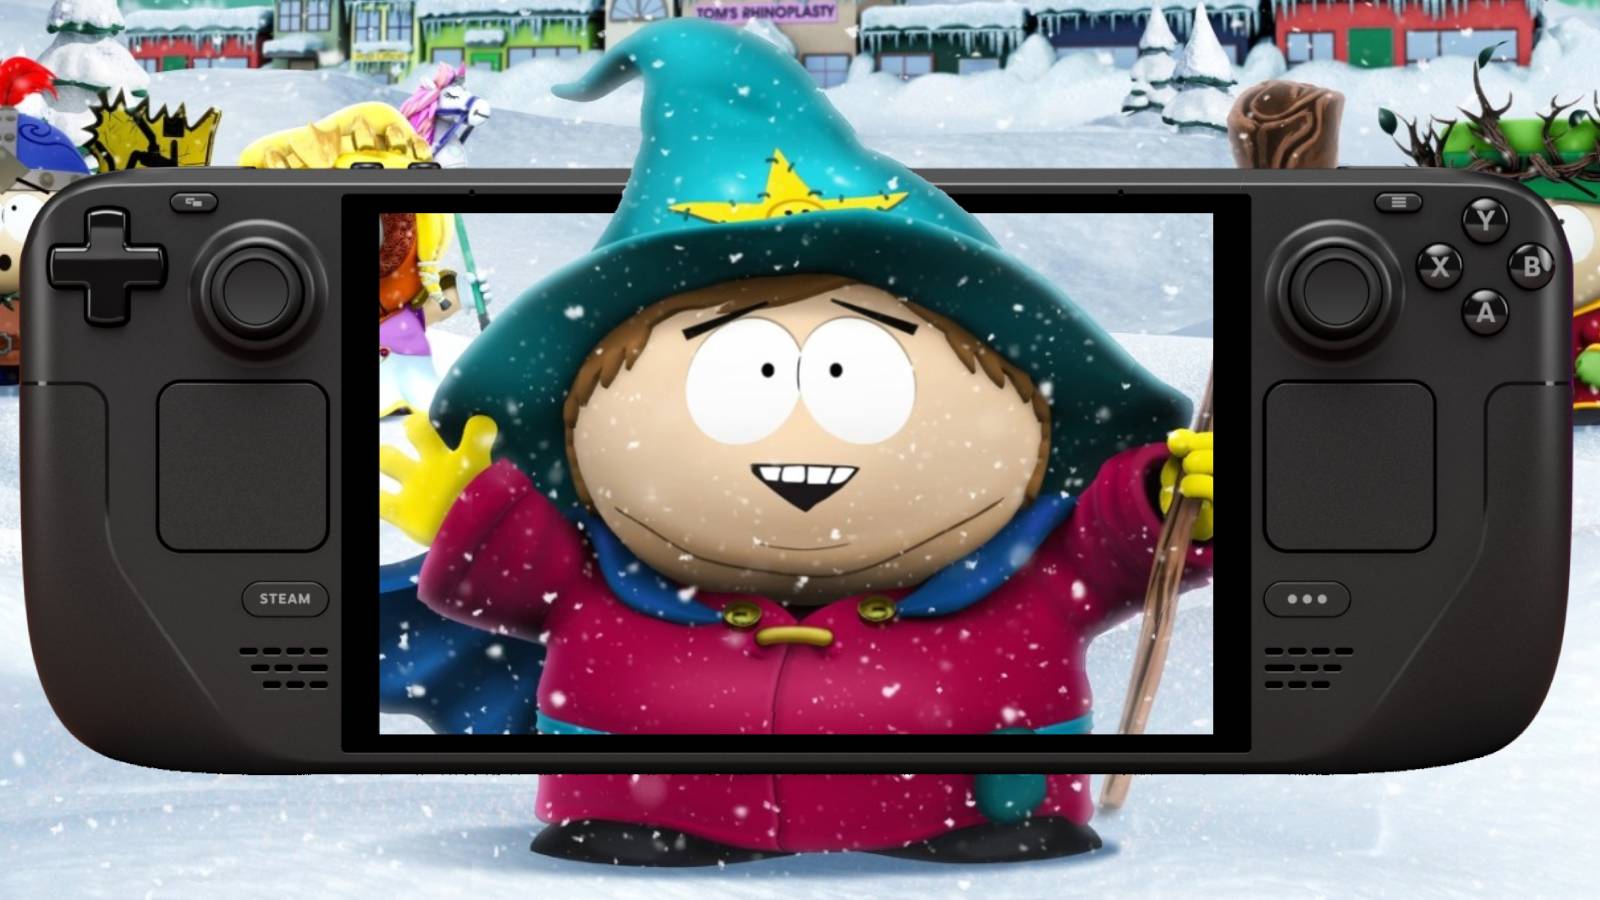 Image of Eric Cartman on the screen of a Steam Deck.